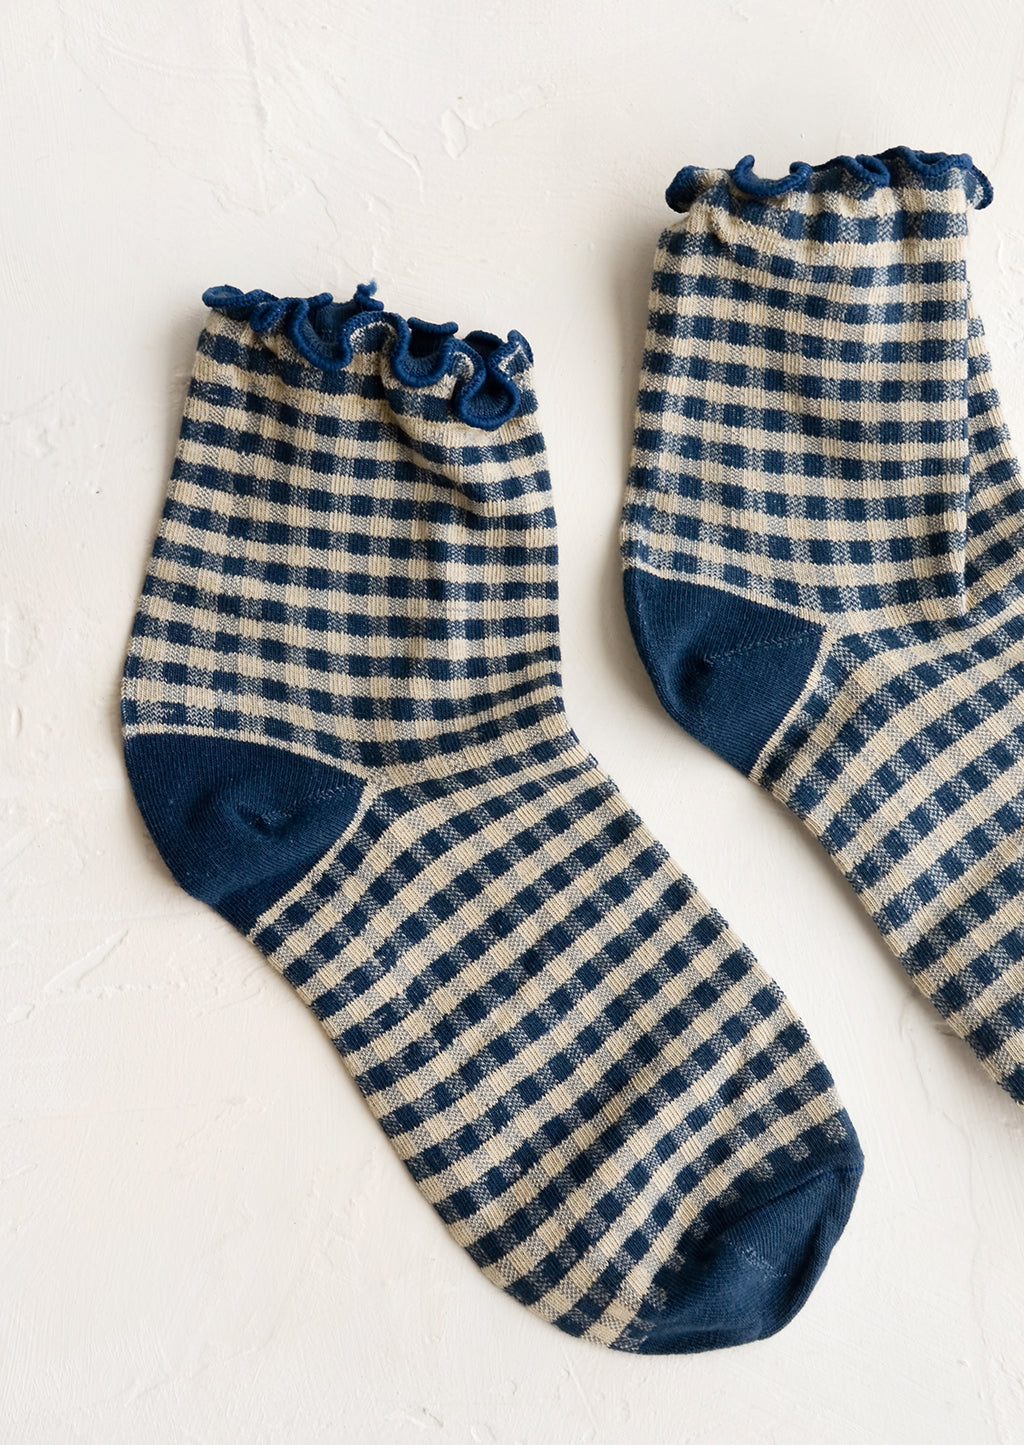 Ink Blue: A pair of dark blue gingham patterned socks with ankle ruffle.